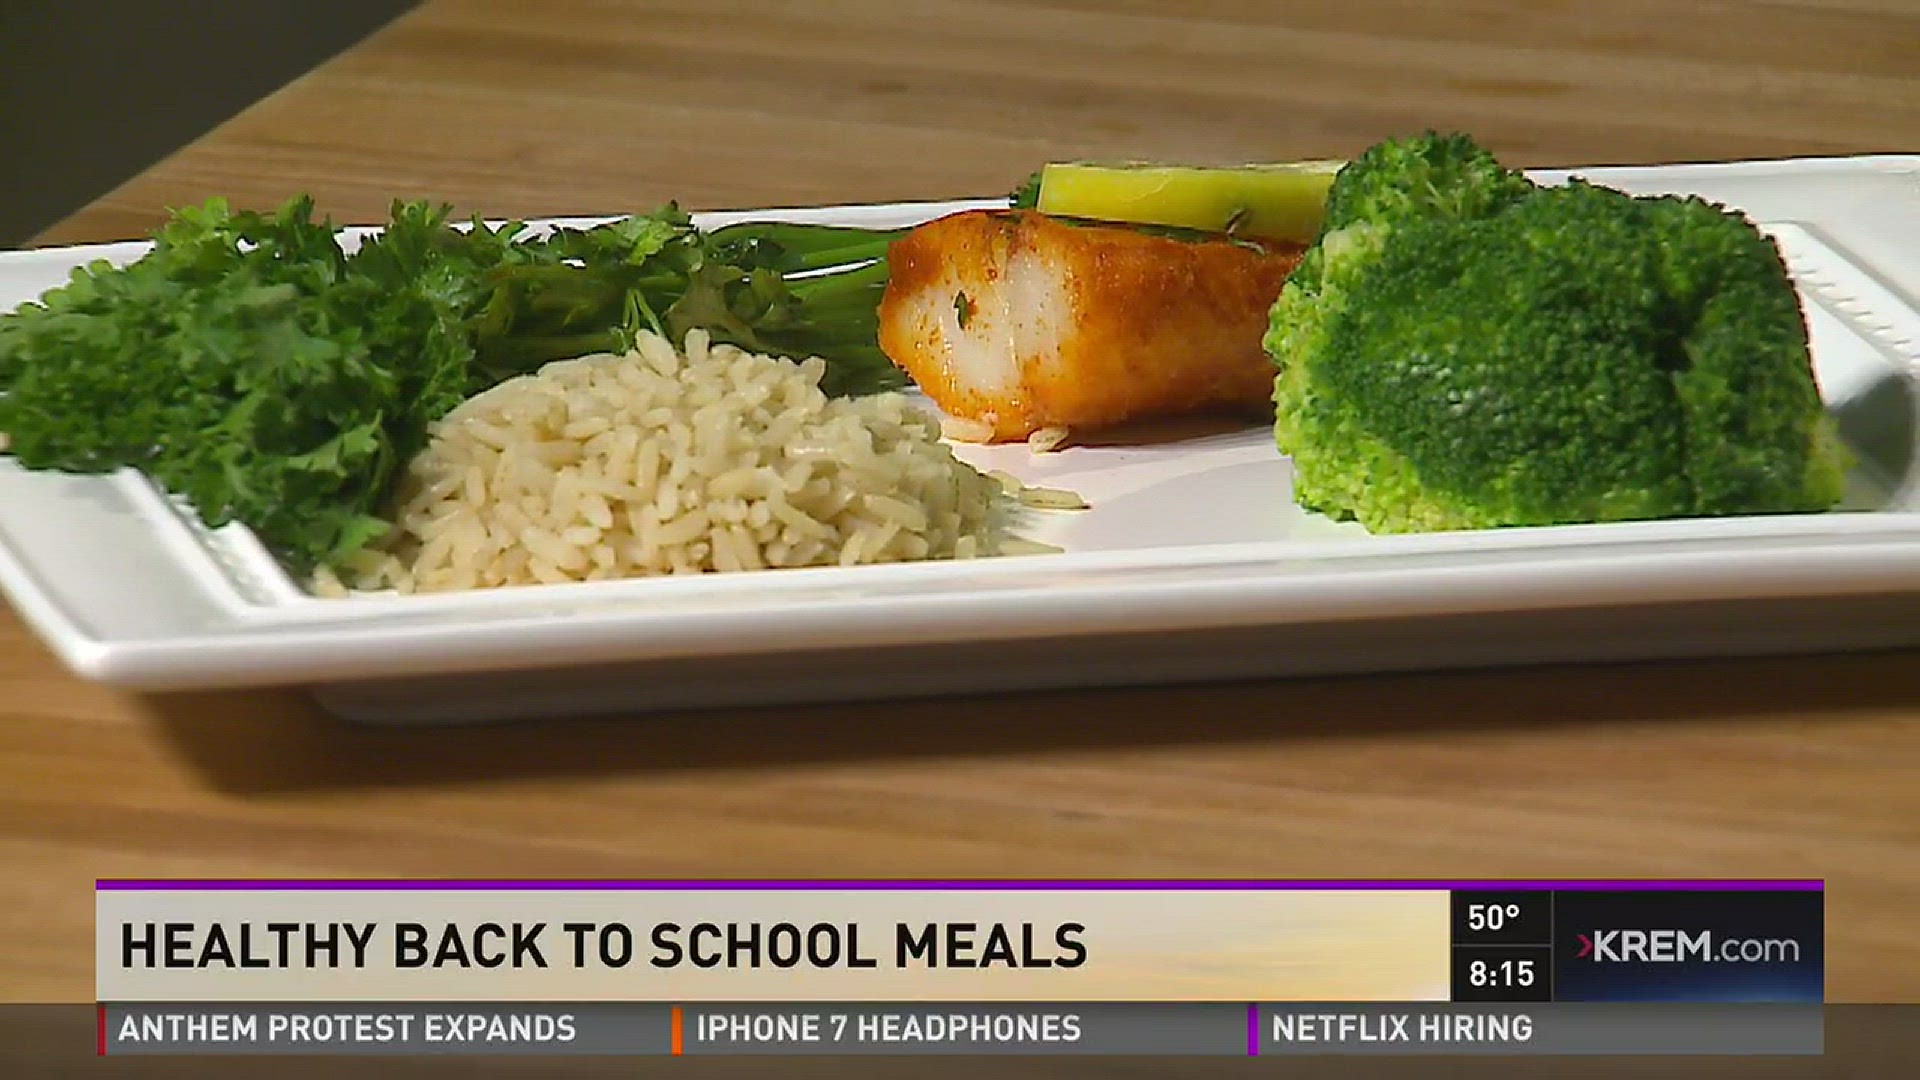 Mary Beth Sherwood from Rockwood Health shared healthy meal ideas for young students and athletes. (9/8/16)